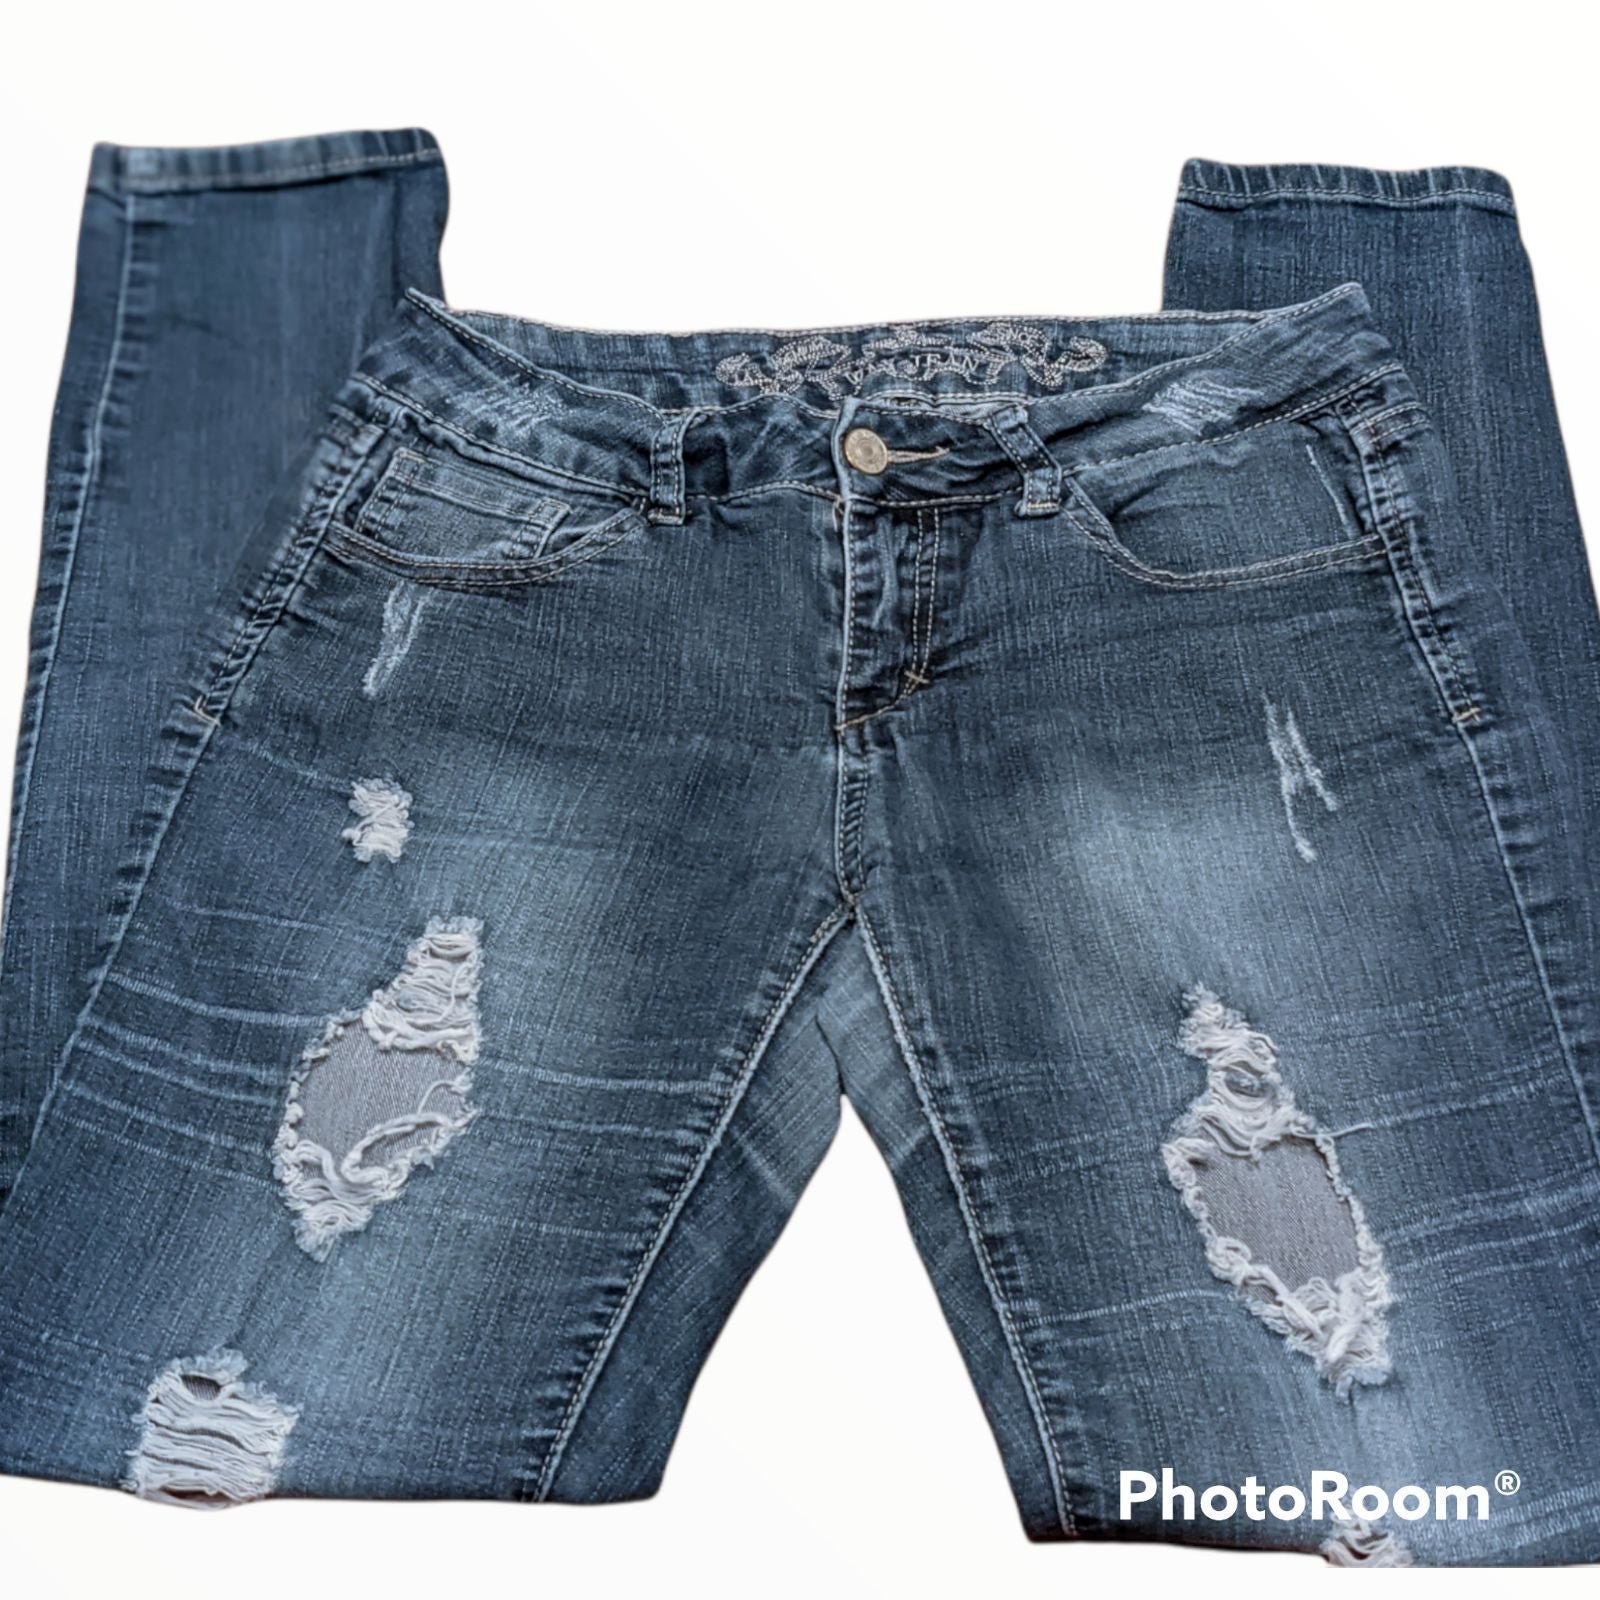 Simple JeansWax Jeans Woman Low Rise Dark Distressed Jeans sz 7 (Junior) PaO3JtFdZ US Outlet